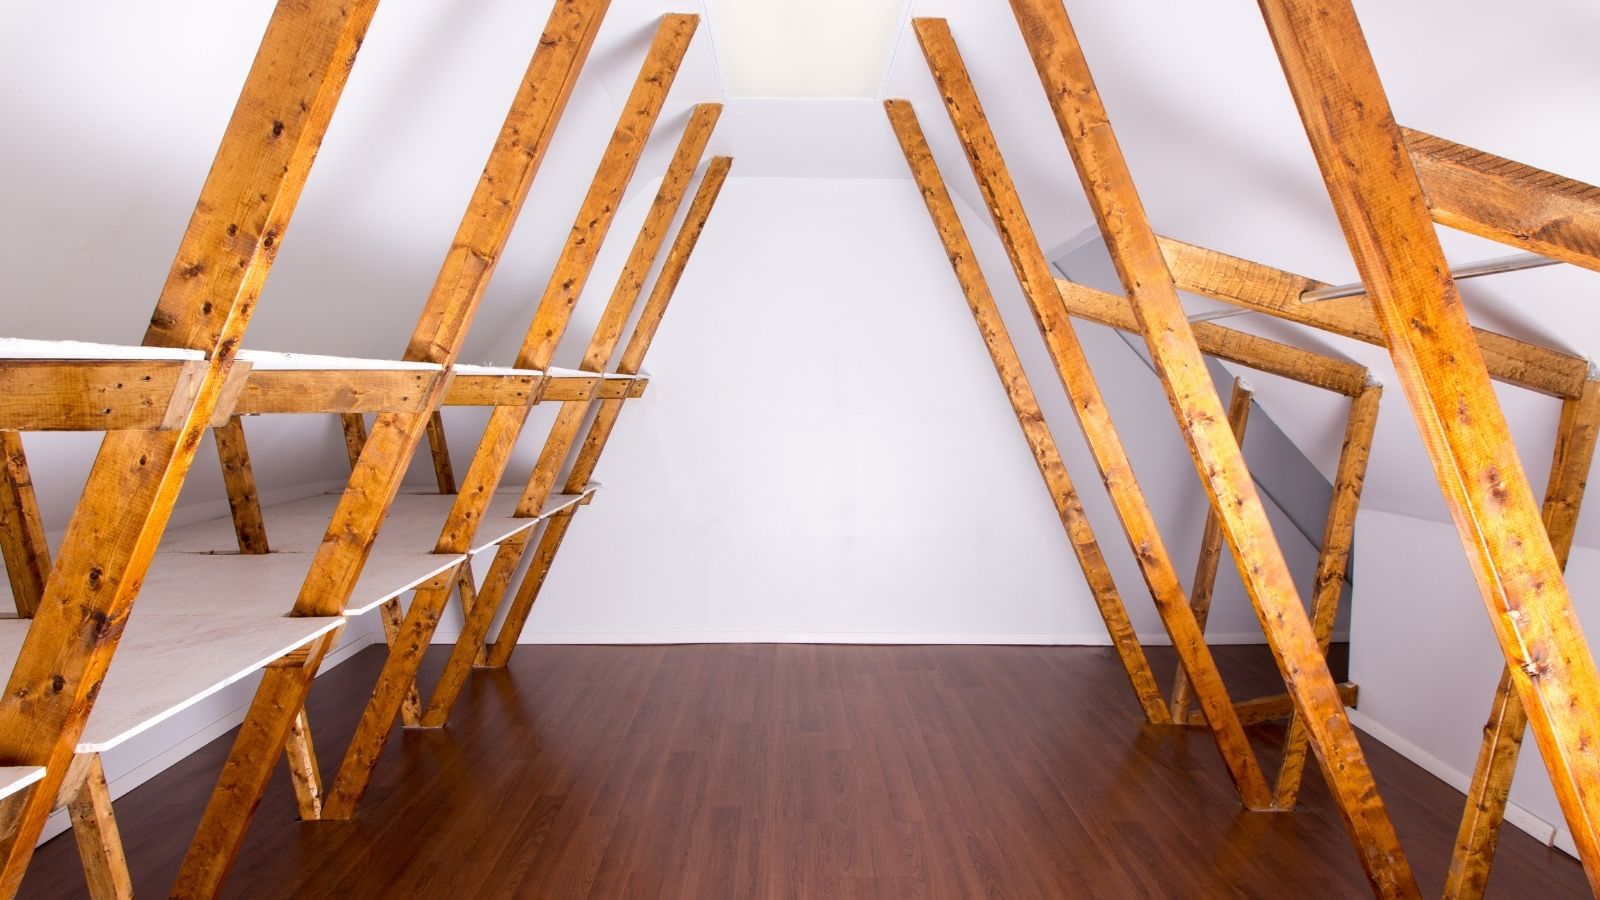 Make More Room in Your Attic Closet with a Clothes Rod
